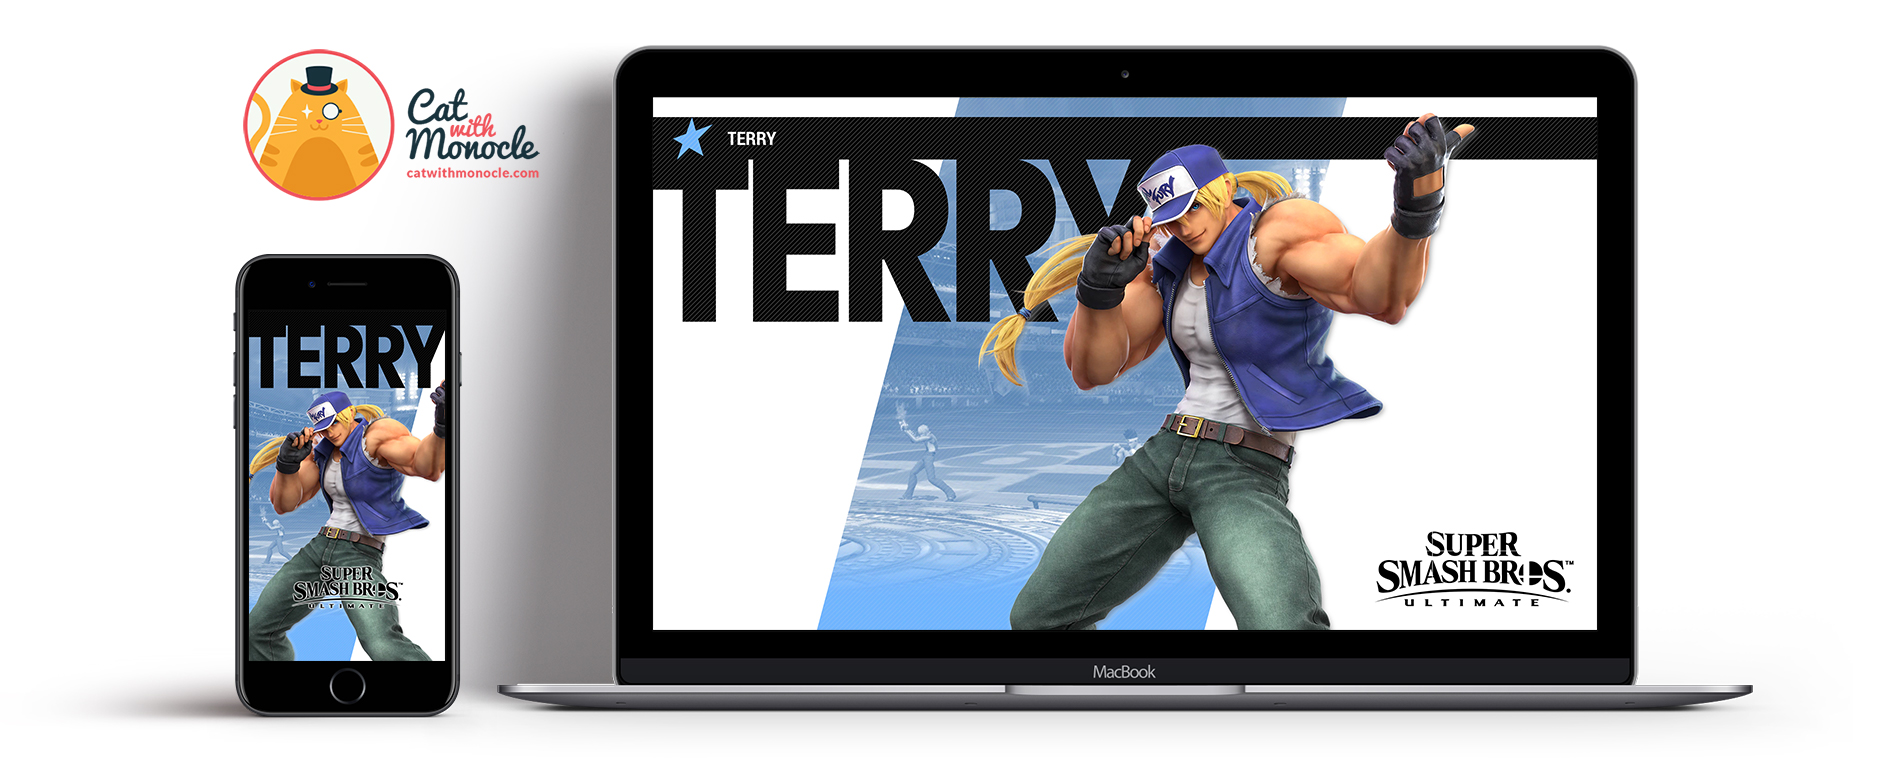 Super Smash Bros Ultimate Terry Wallpapers Costume 2